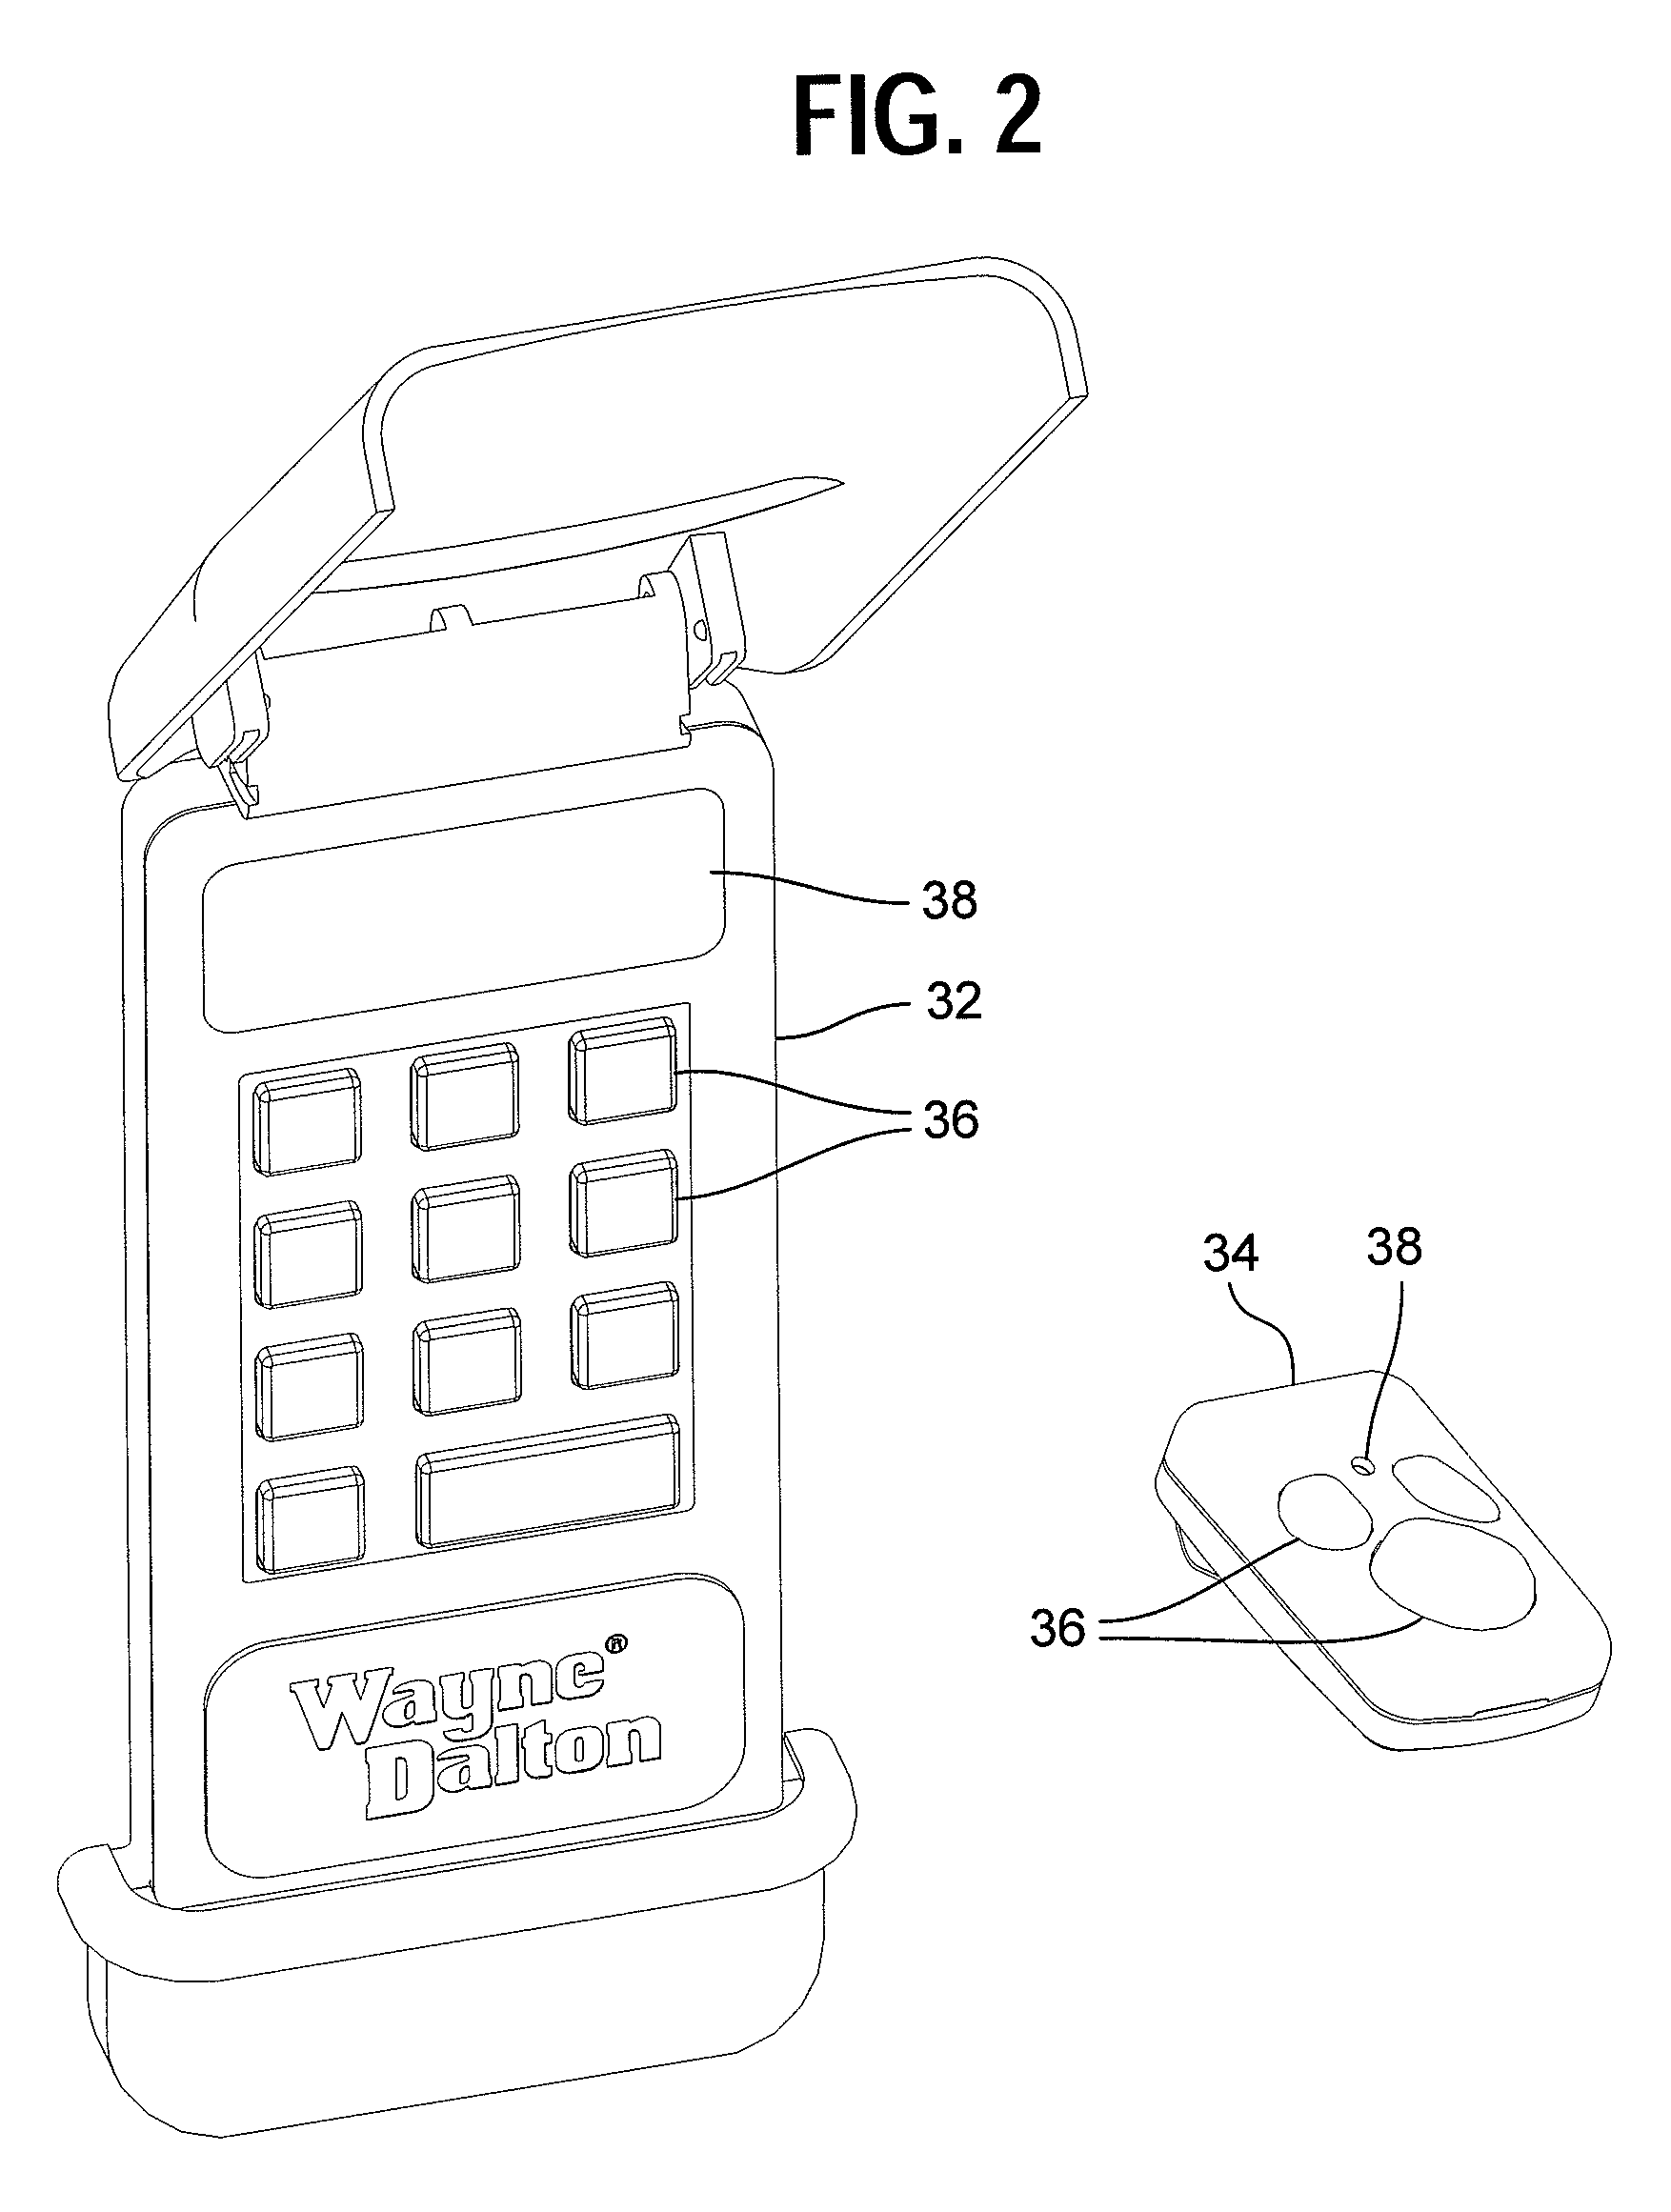 Control for positioning multiple barriers apparatus and method